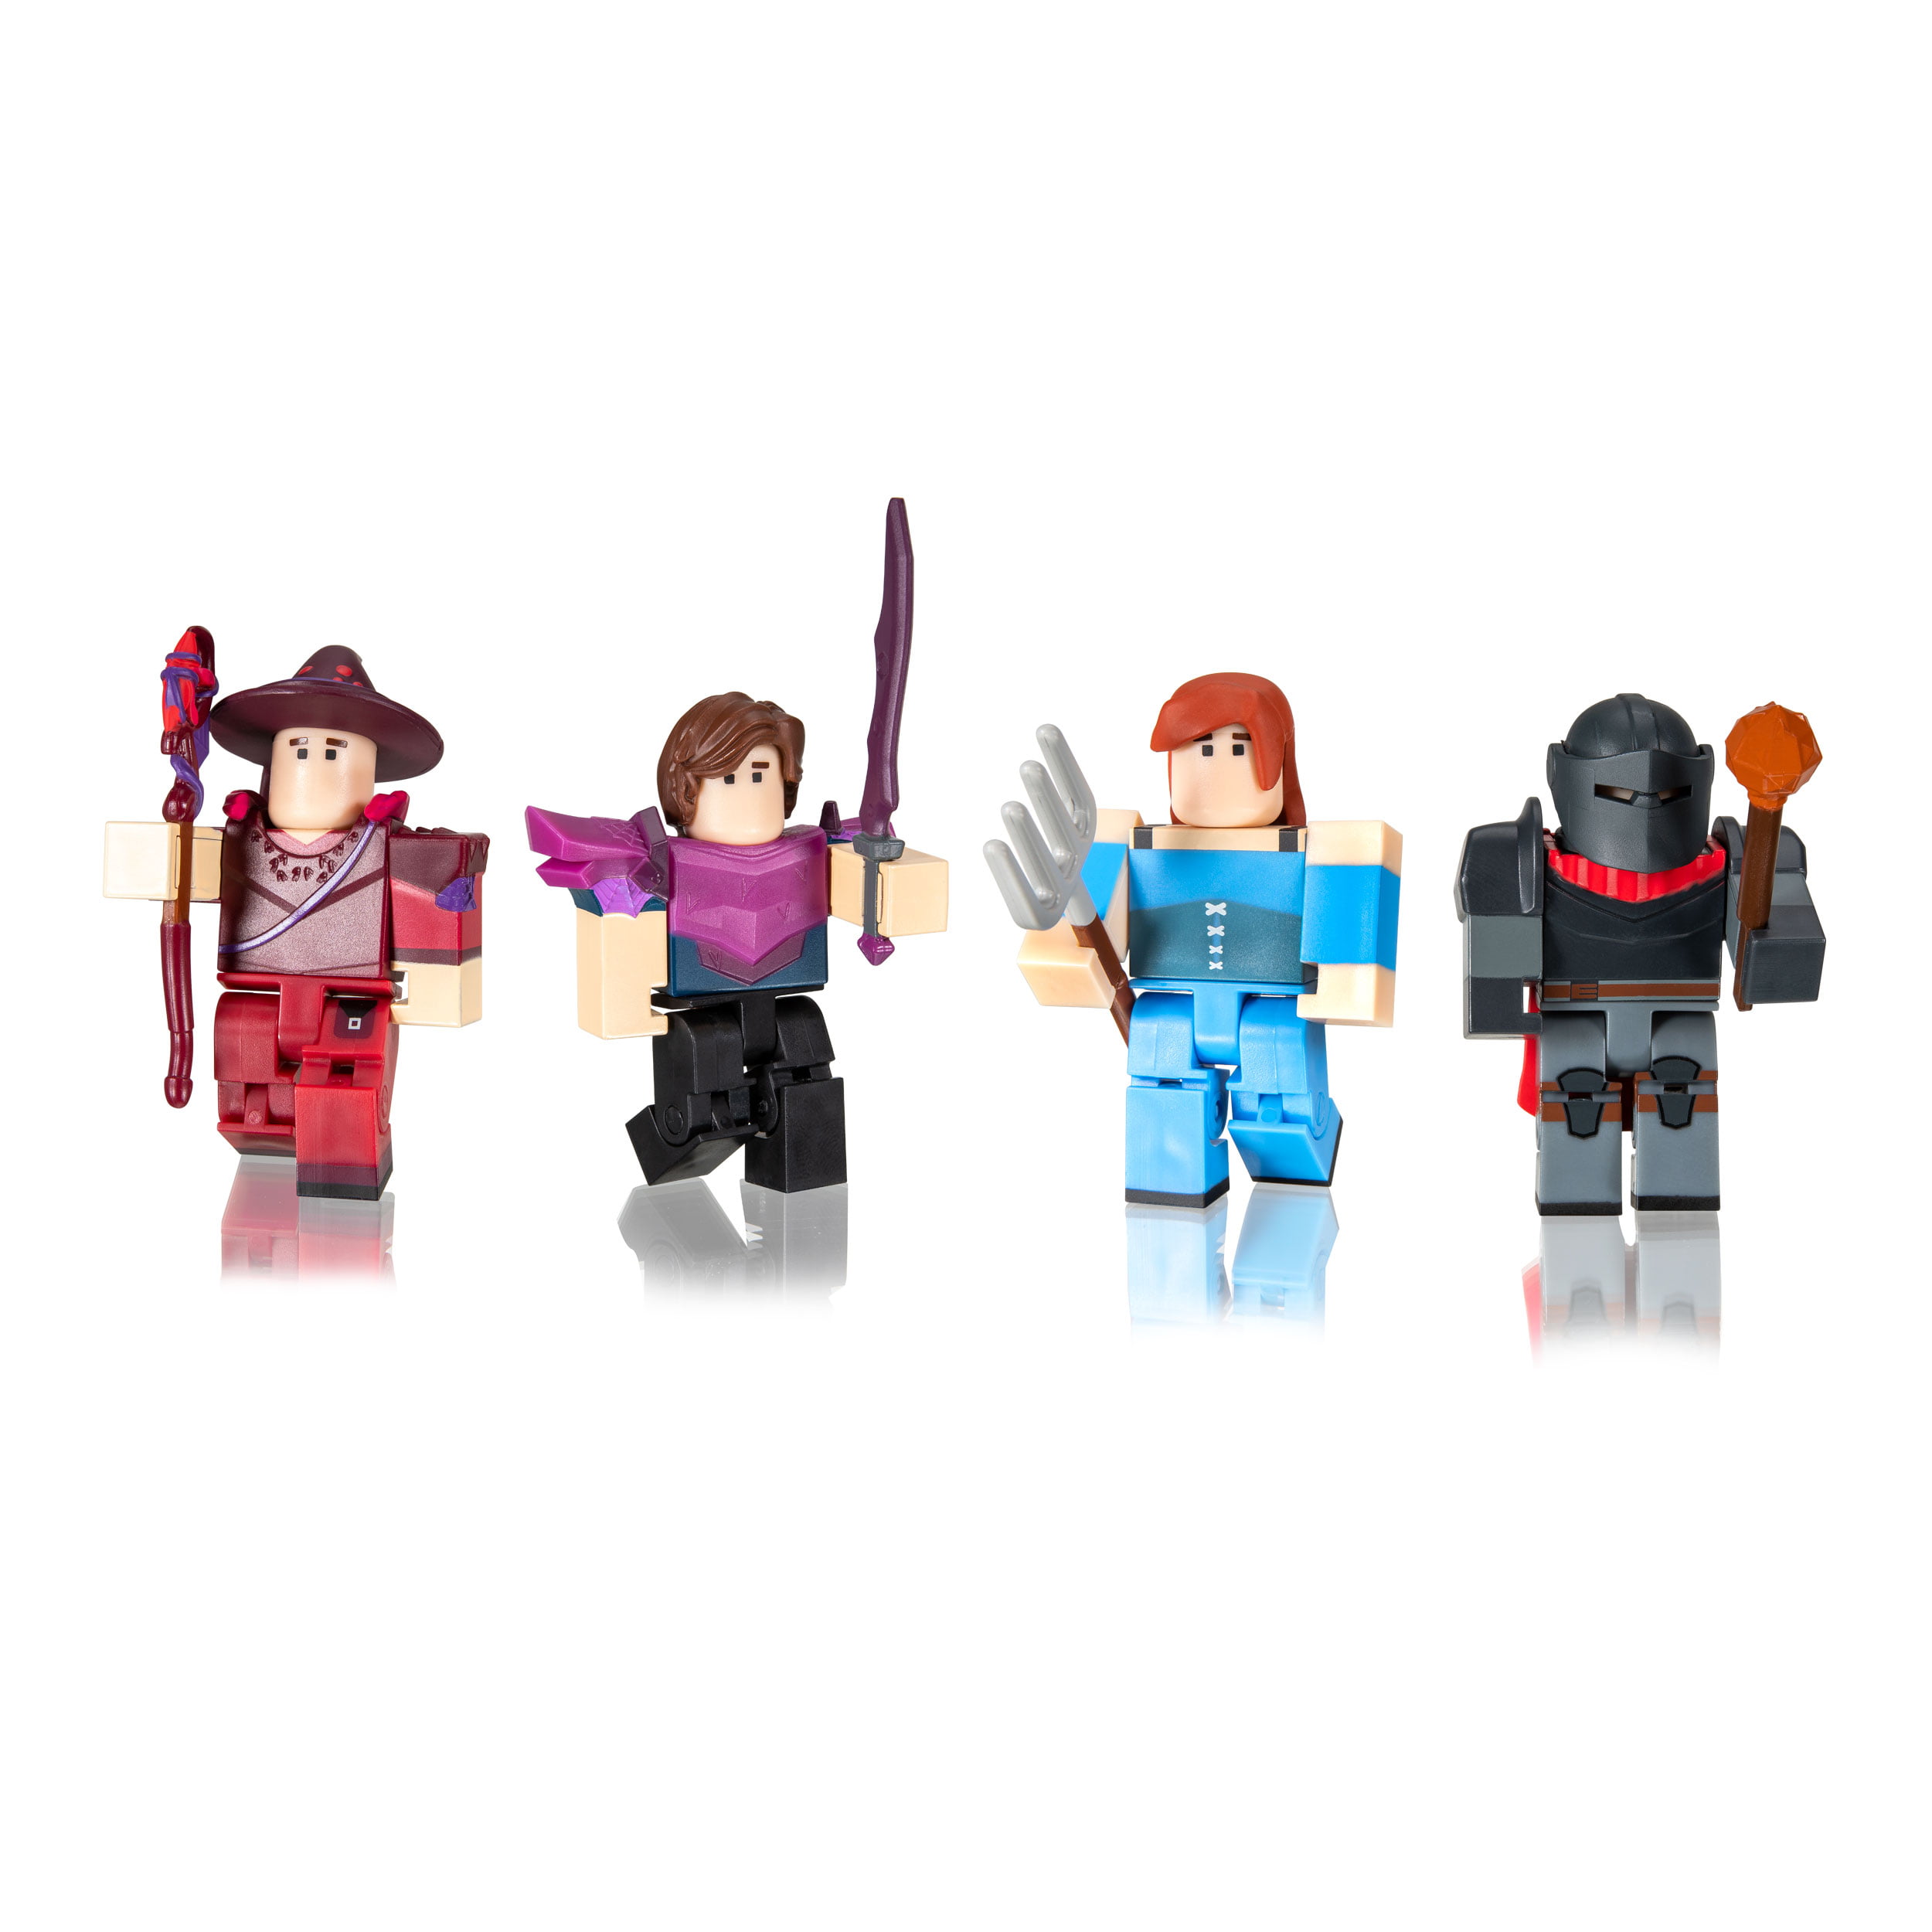 Roblox Celebrity Collection Vesteria Dark Forest Four Figure Pack Includes Exclusive Virtual Item Walmart Com Walmart Com - roblox vesteria how to get double jump